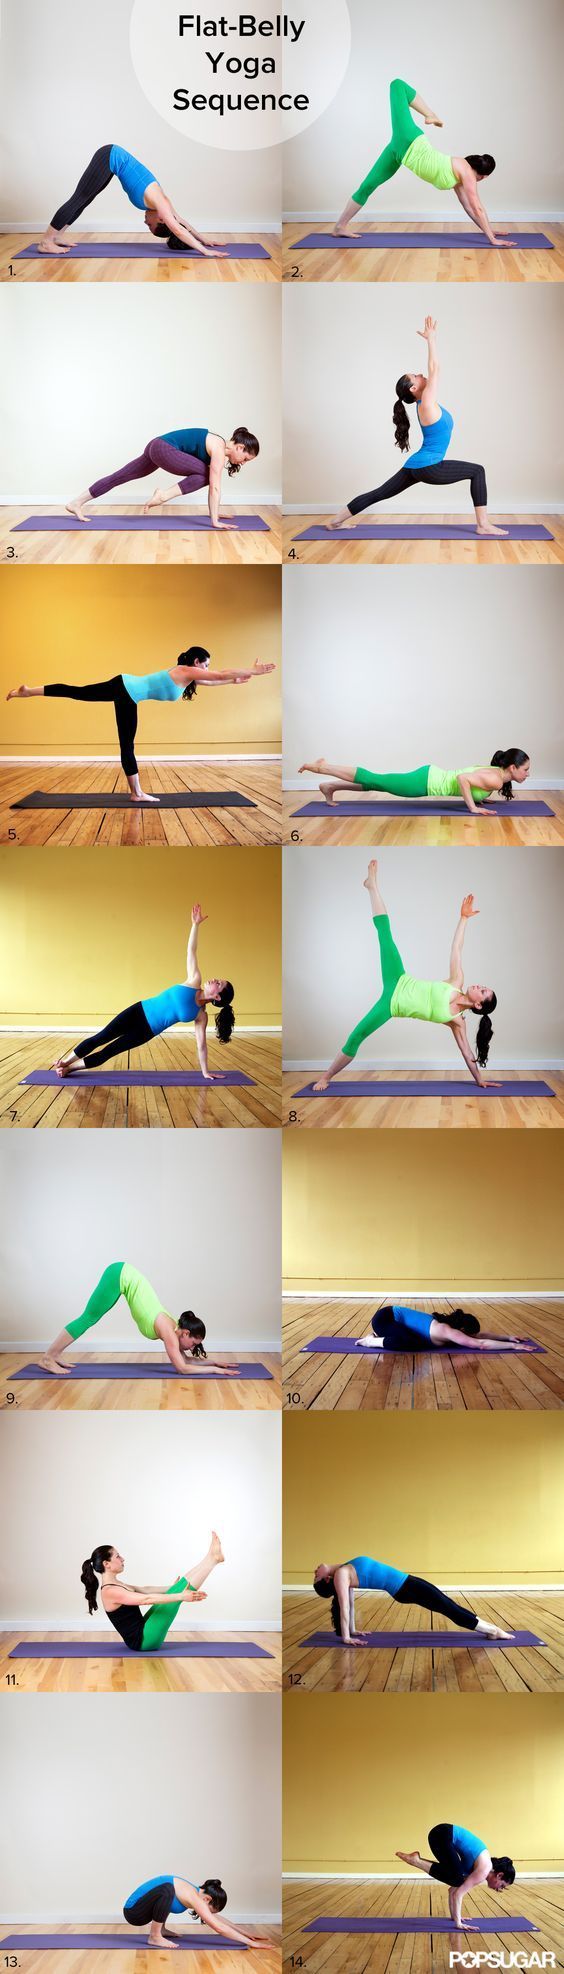 After Trying This Yoga Sequence, You'll Never Do Another Crunch. Swap these #yog...